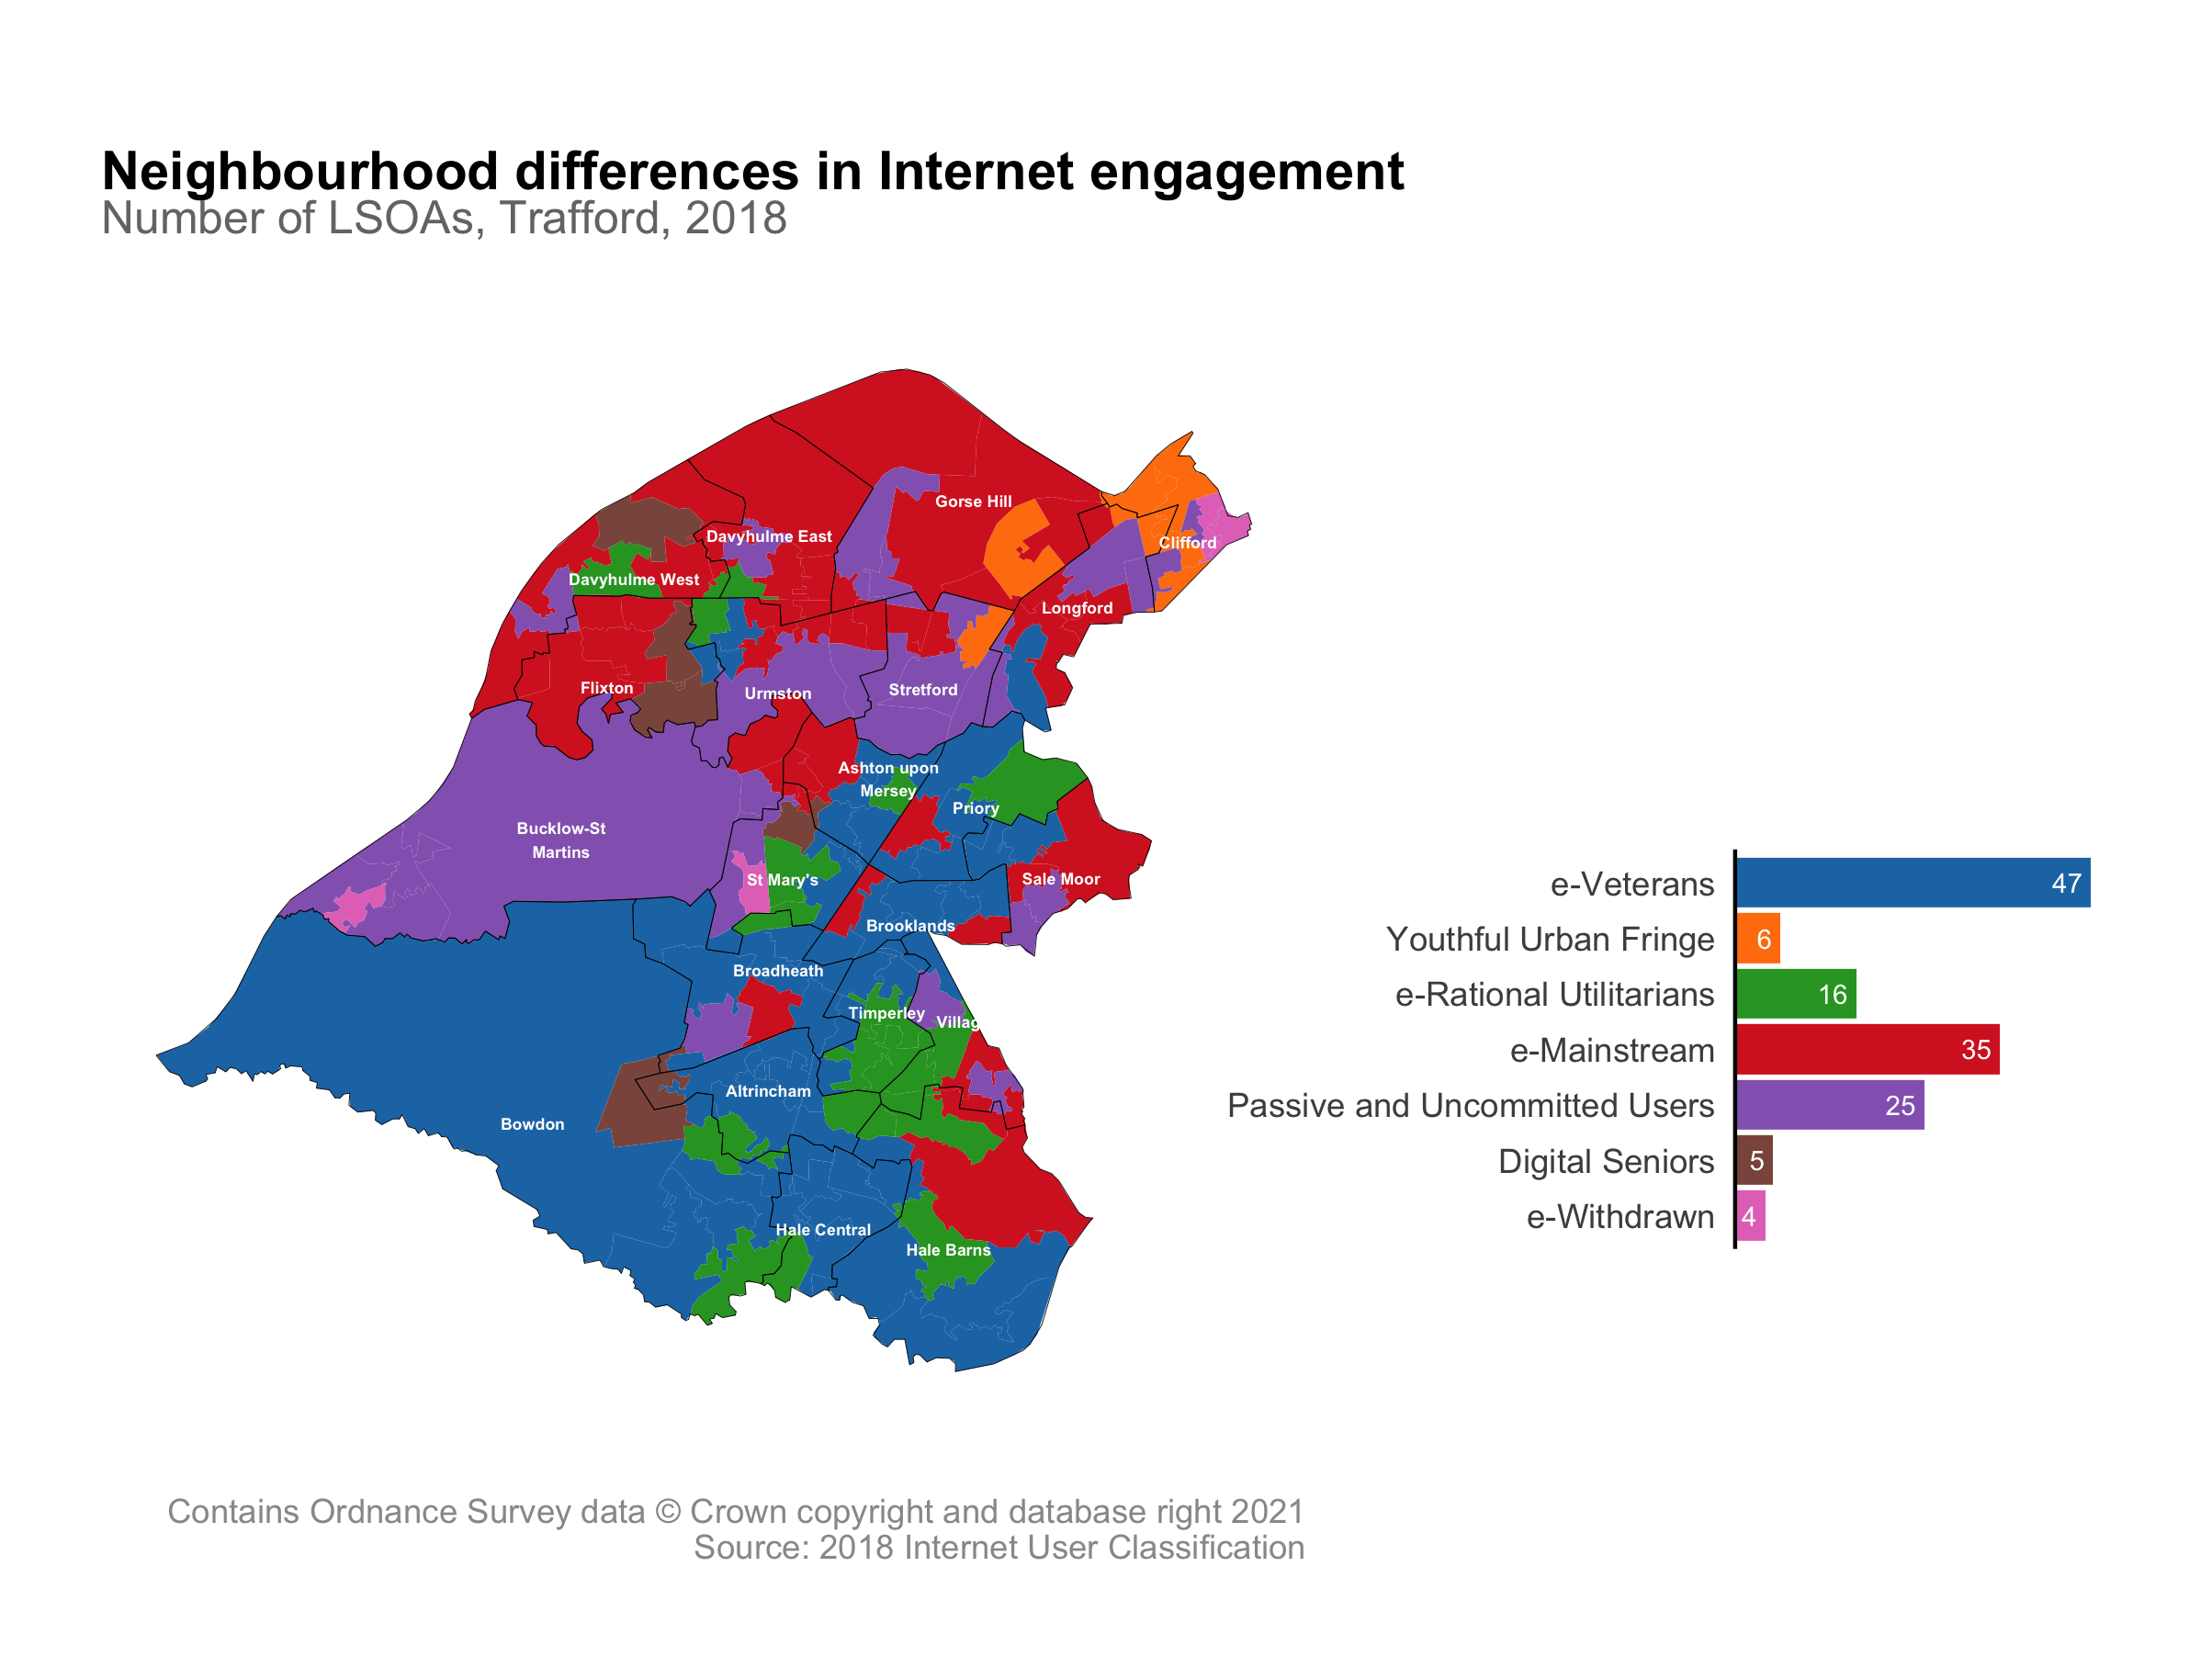 Map showing the distribution of Internet engagement across Trafford's neighbourhoods